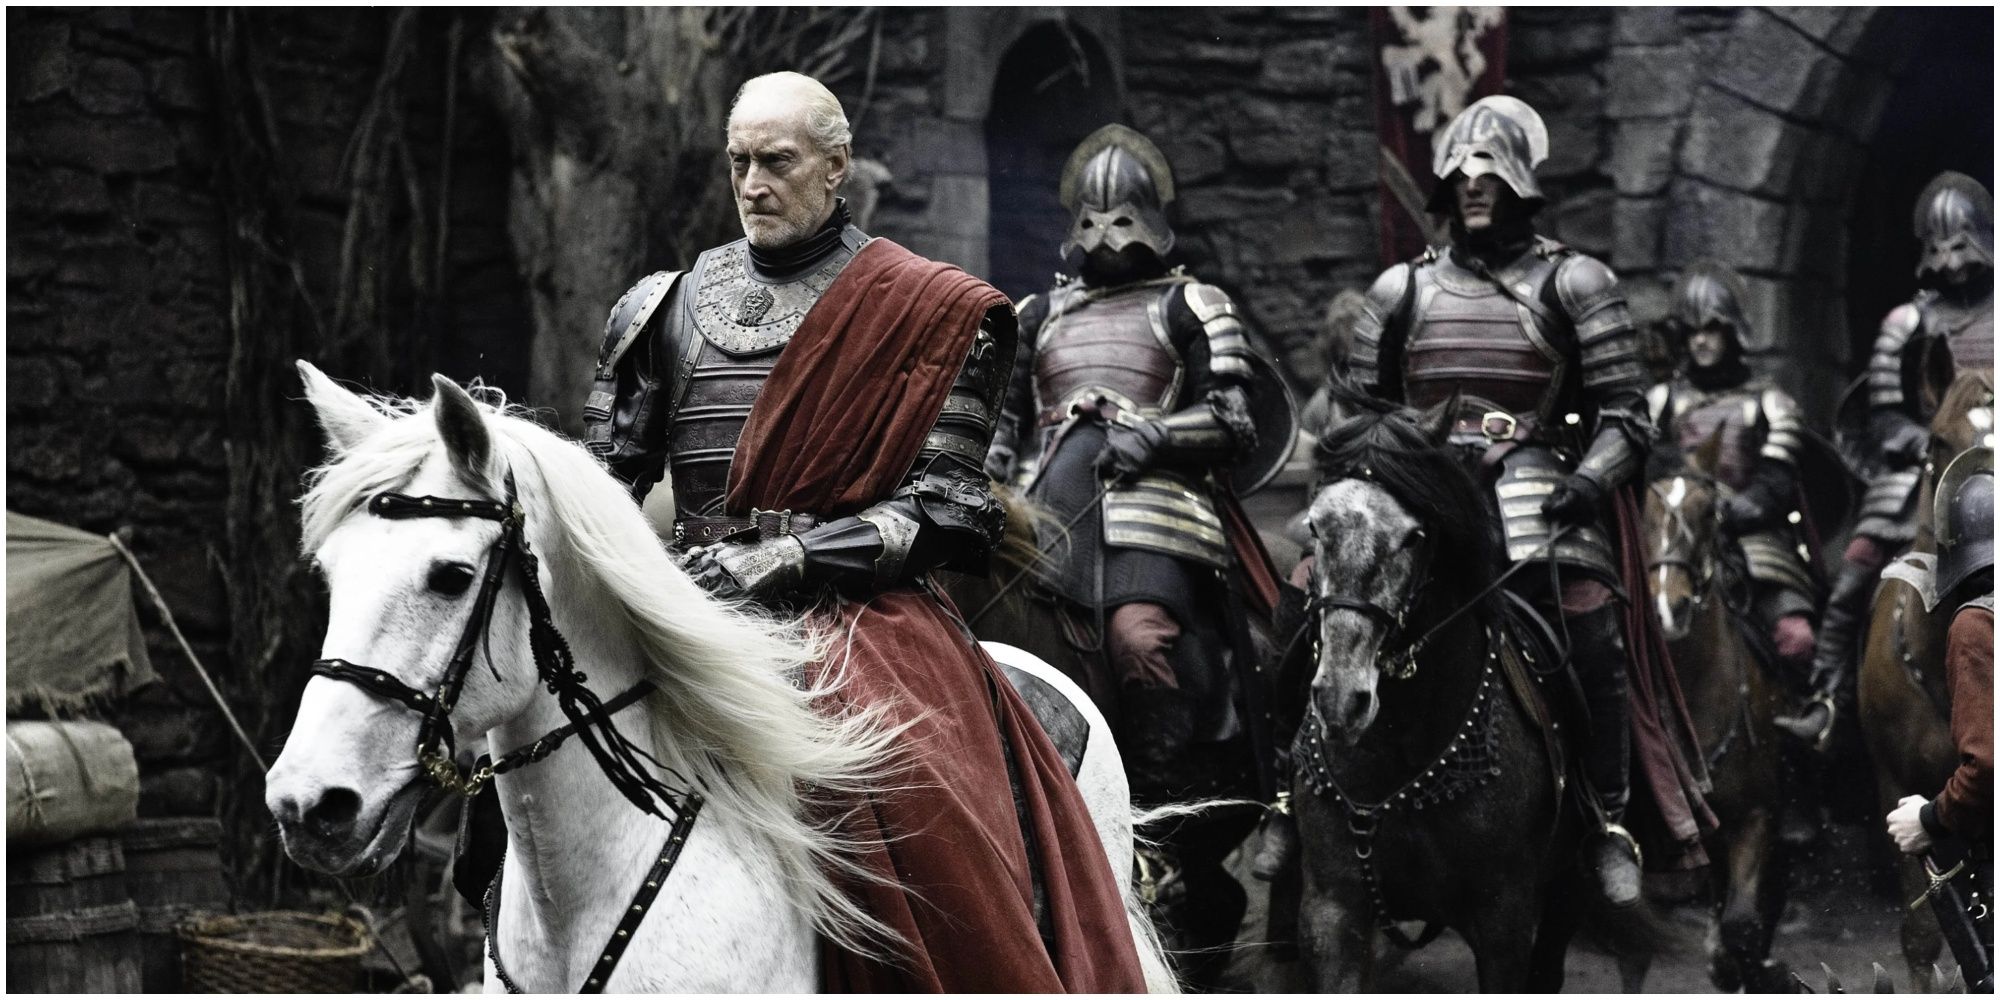 Tywin Lannister at Harrenhal in Game of Thrones